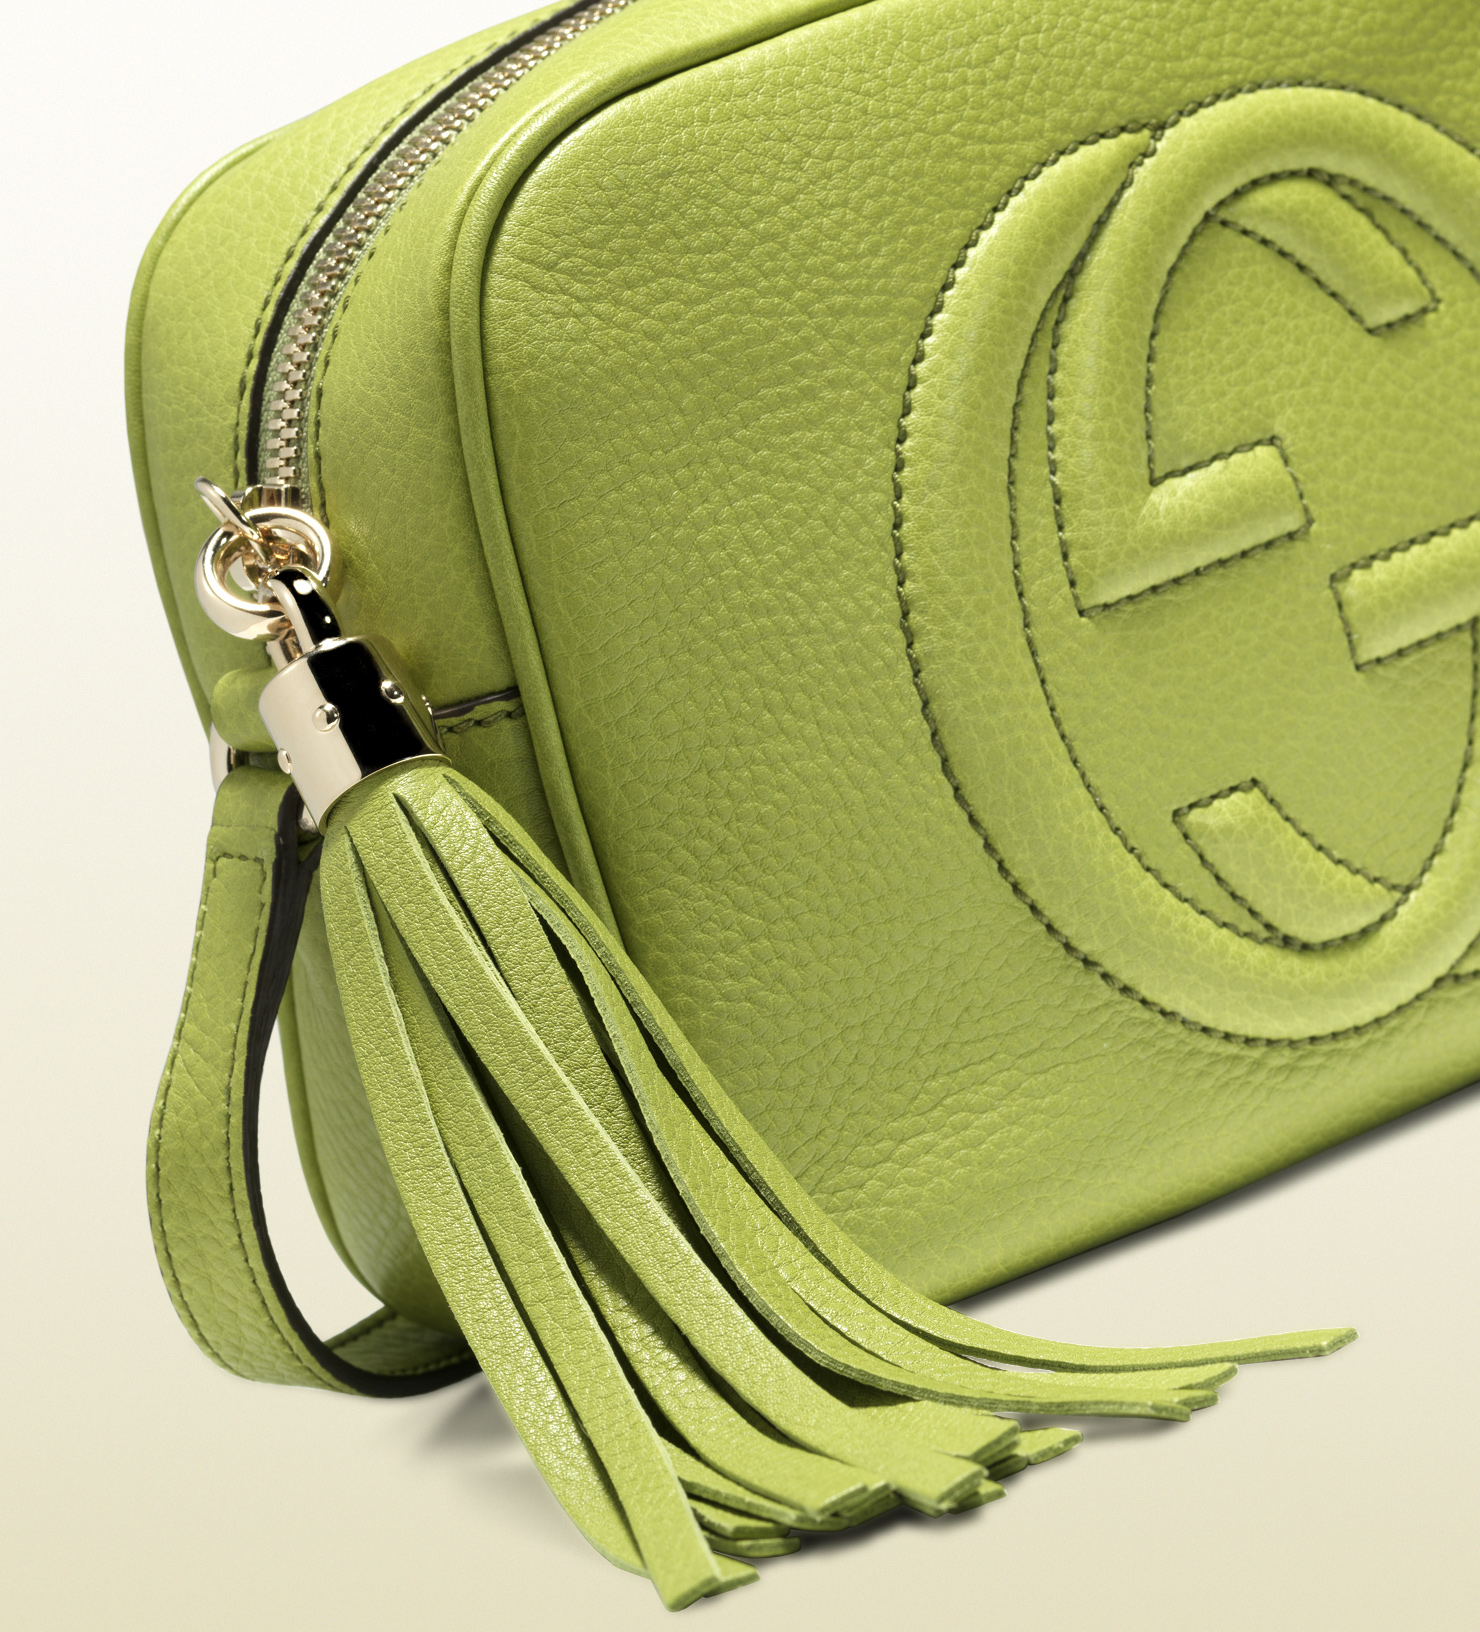 Lyst - Gucci Soho Apple Green Leather Disco Bag in Green